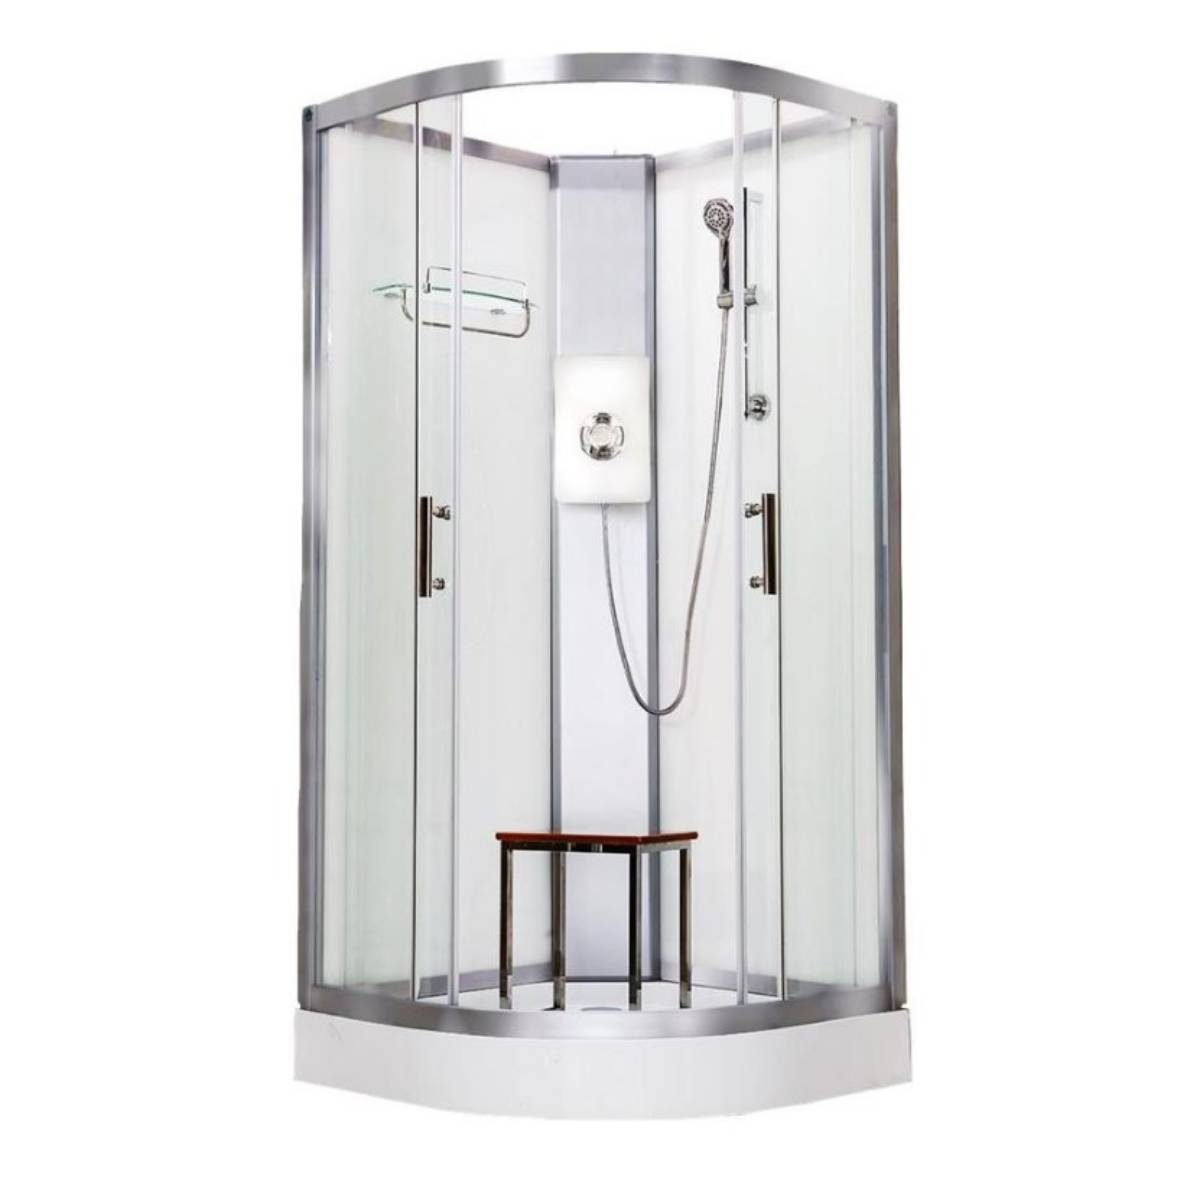 Vidalux Pure Electric 900mm Shower Cabin White - Lux White 8.5KW (11654)